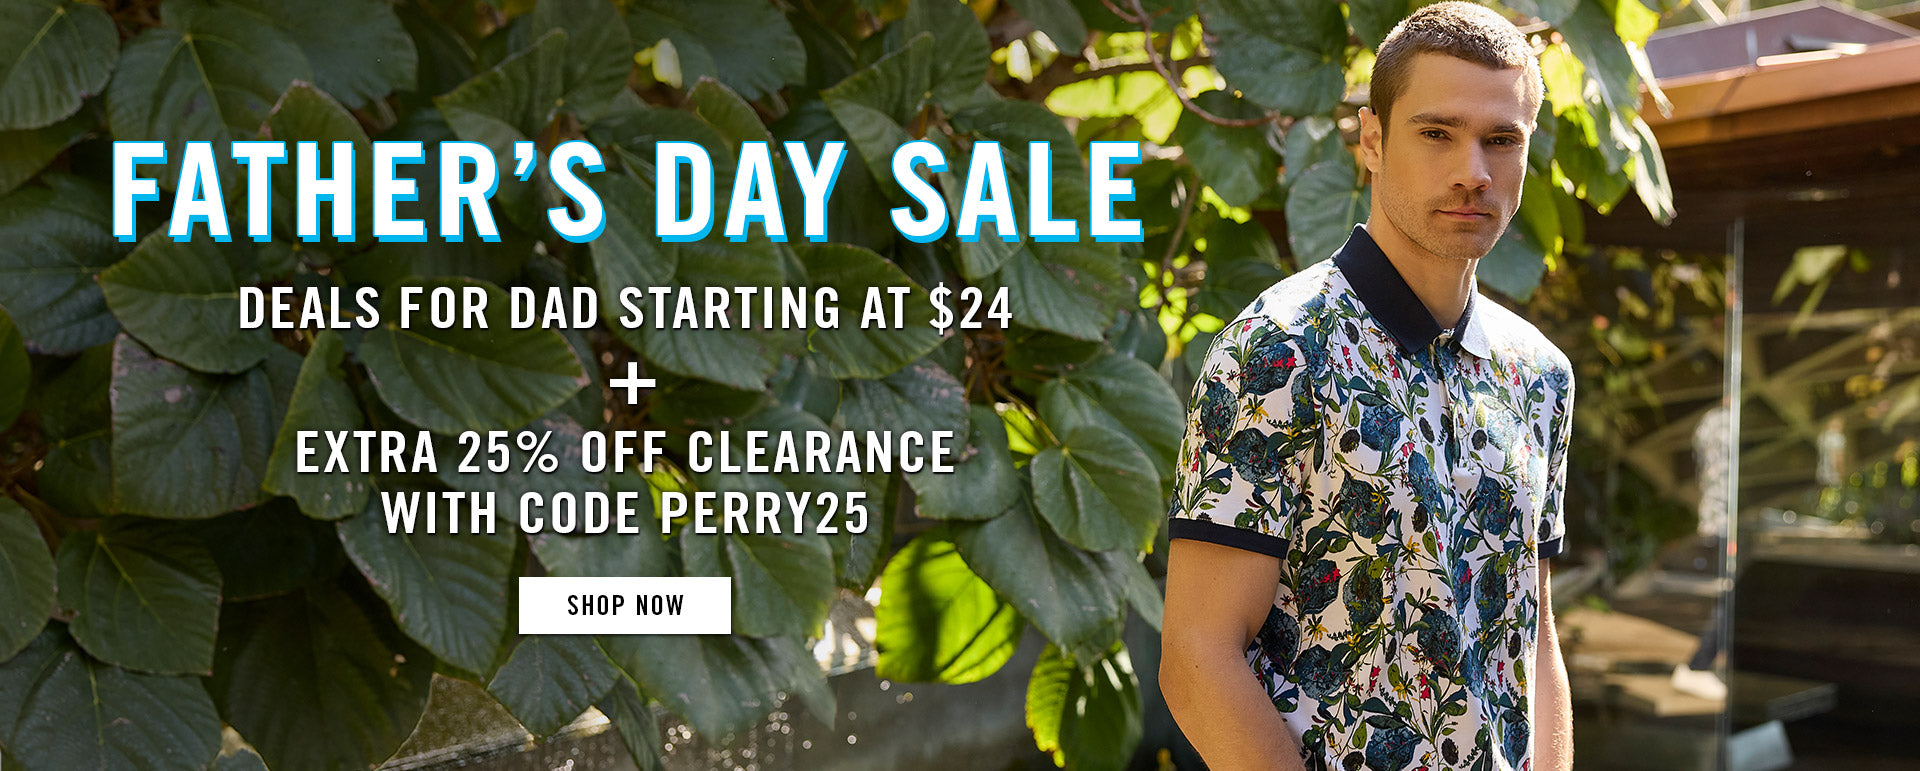 fathers day sale - DEALS FOR DAD STARTING AT $24| SHOP NOW